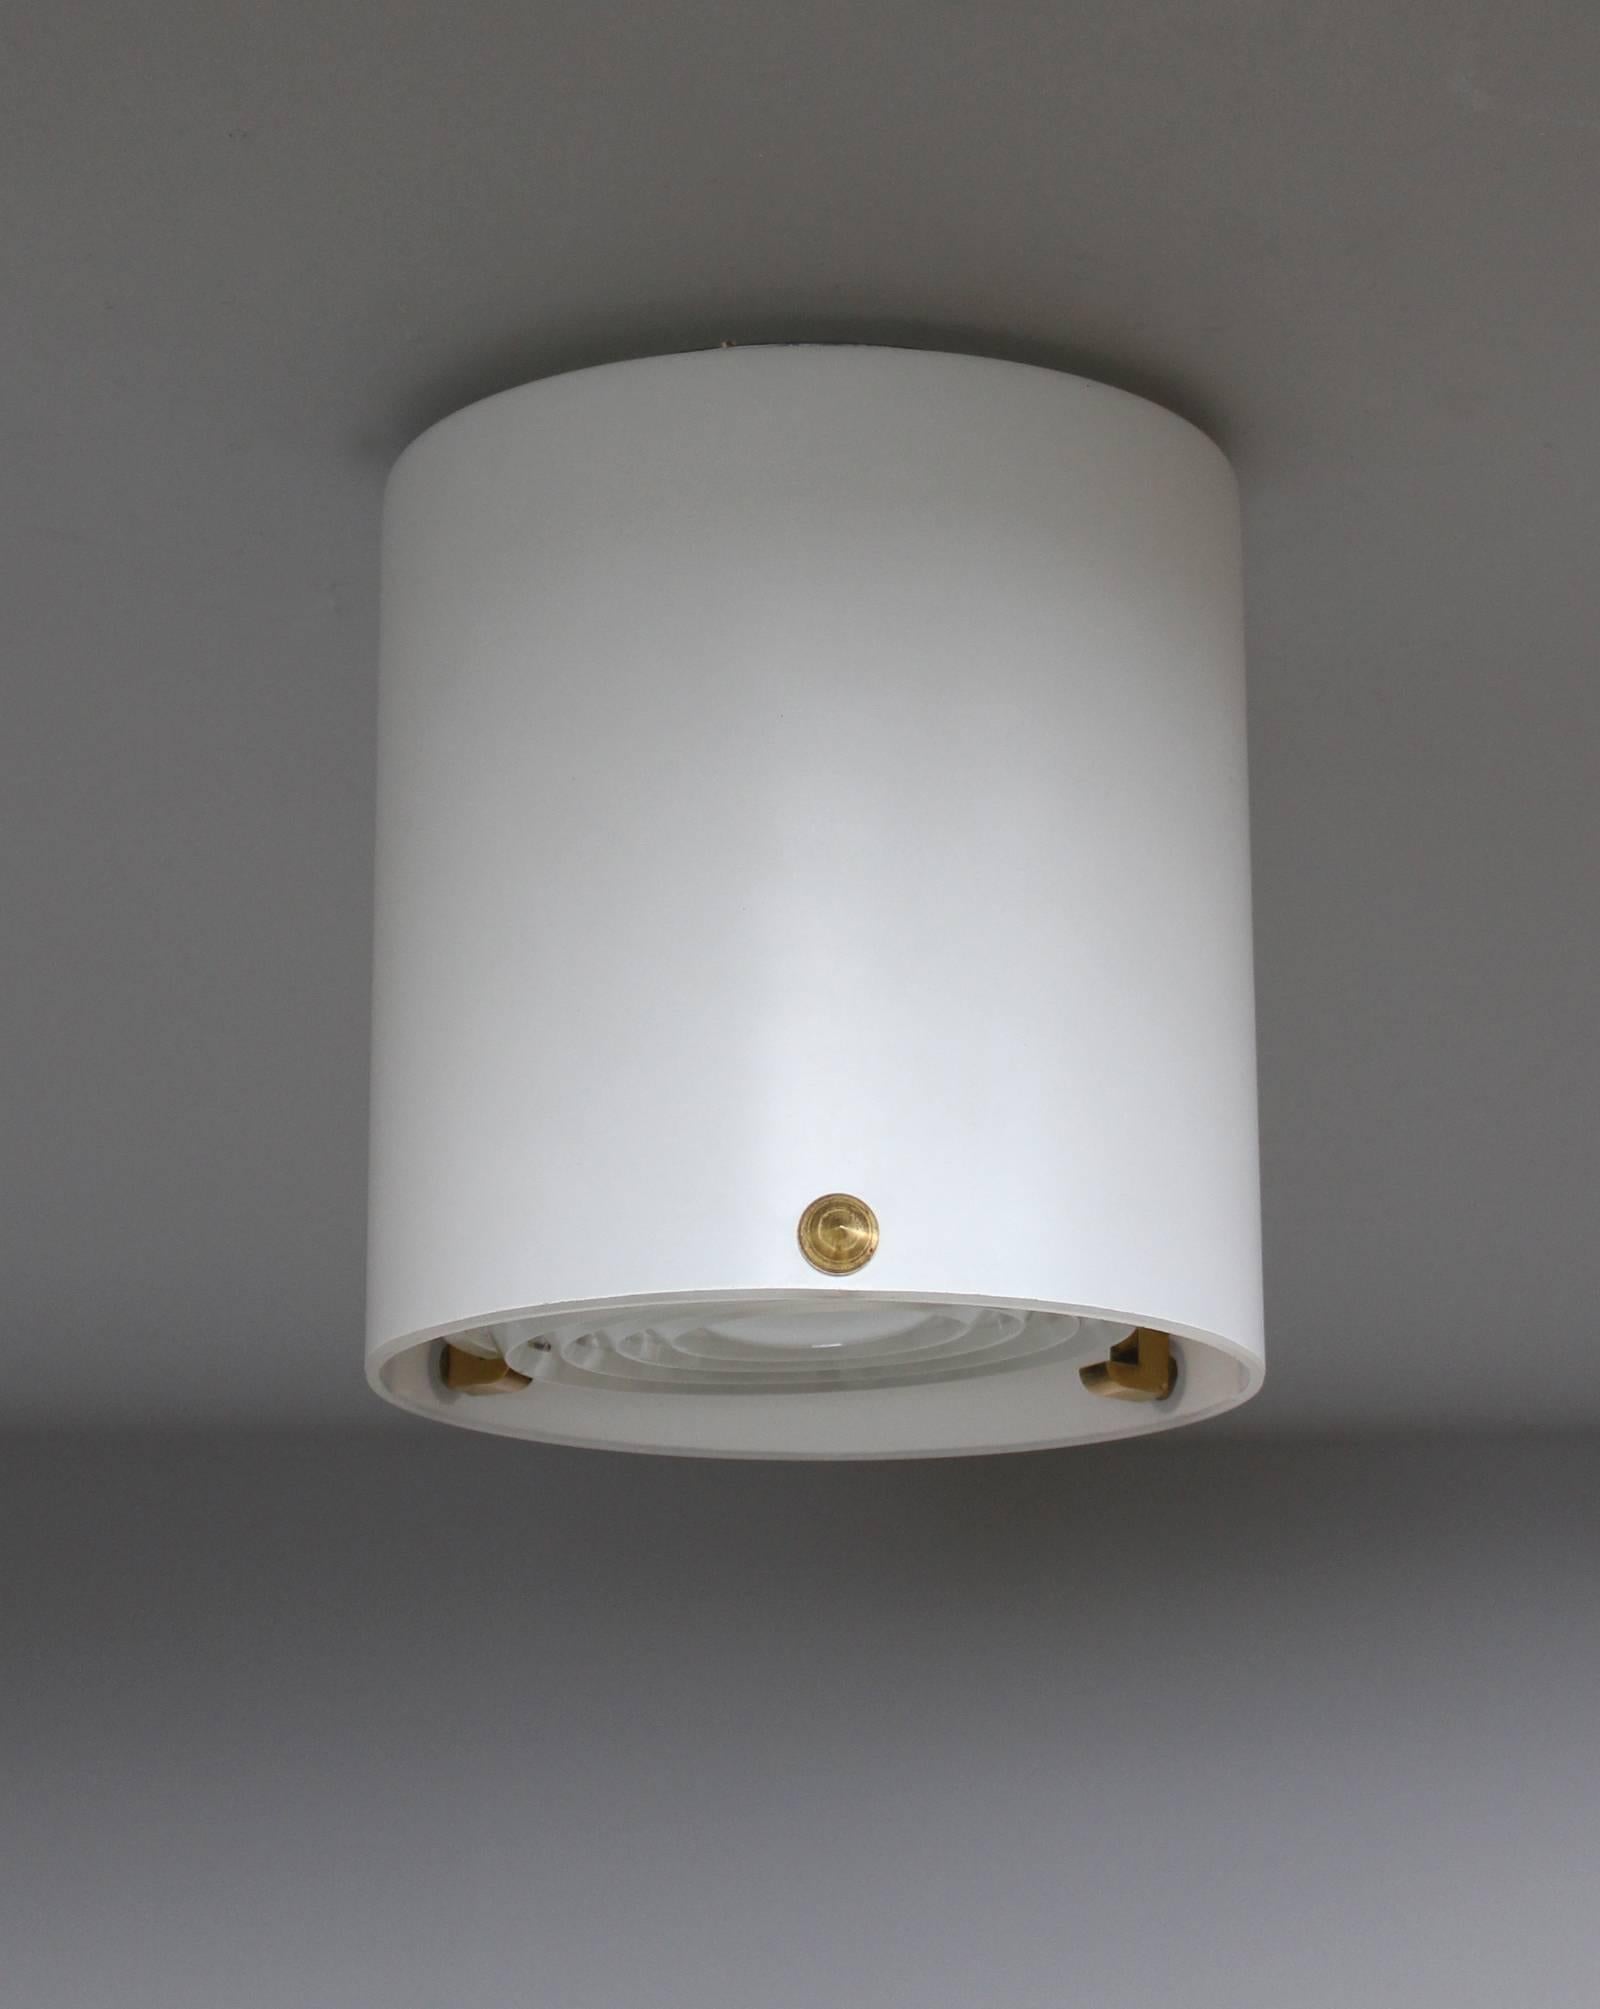 Two French 1950s cylinder-shaped flush mount or ceiling light in acid satin enameled glass by Jean Perzel with brass studs that support a prismatic frosted glass lens.
Price is per piece.